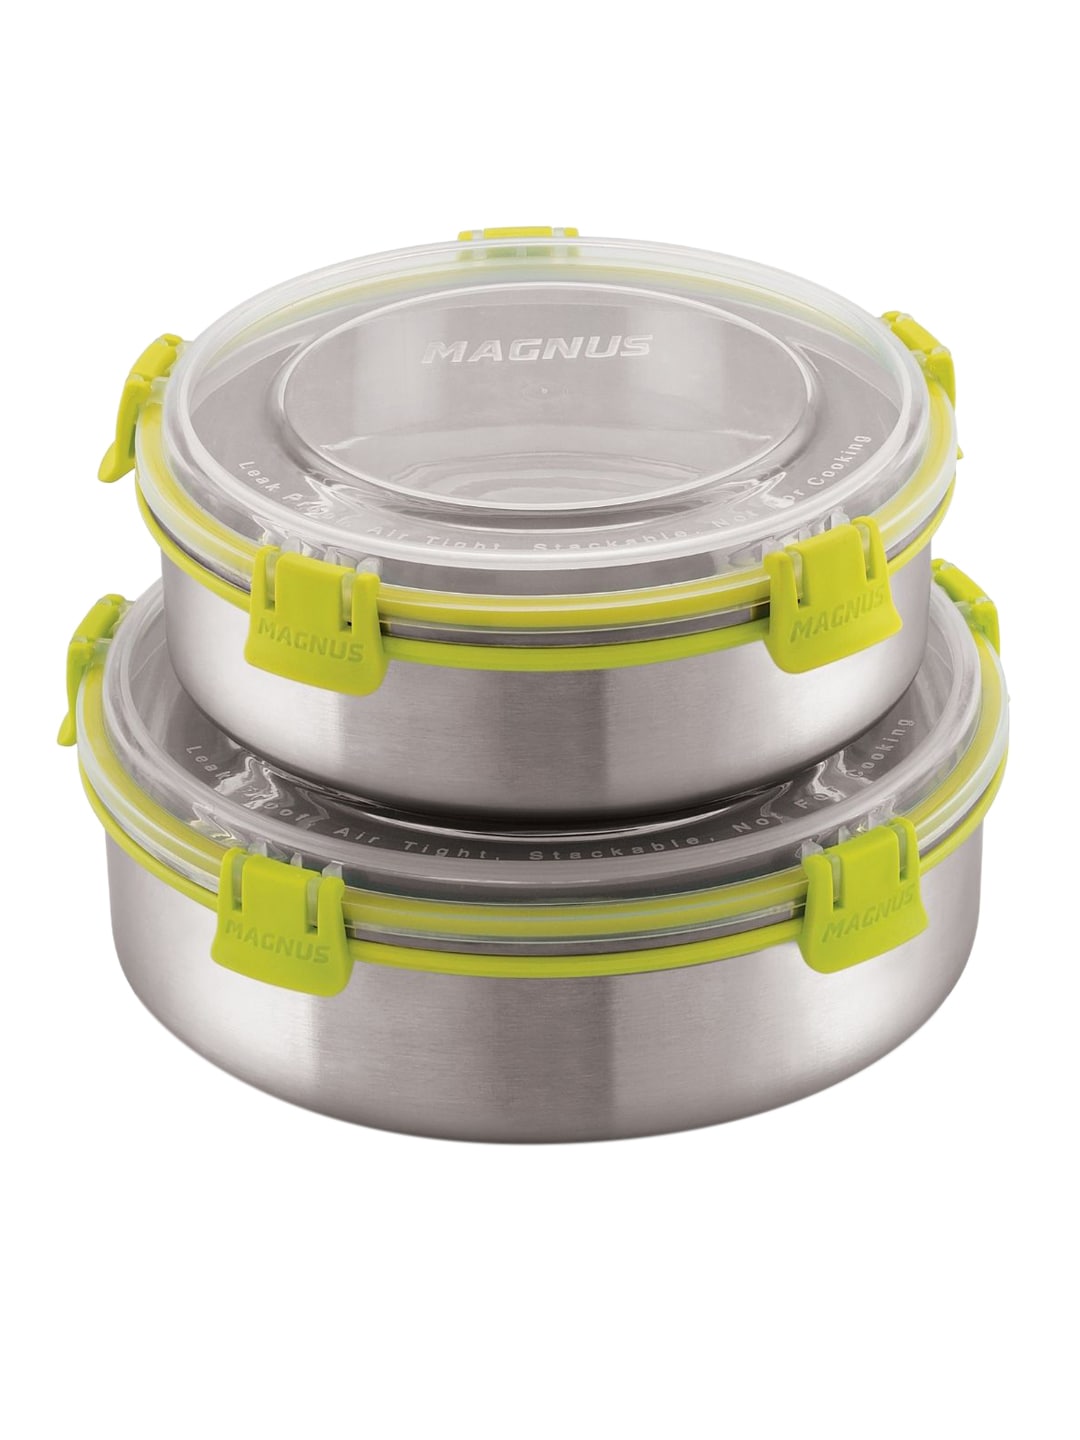 MAGNUS Set Of 2 Stainless Steal Storage Containers Price in India